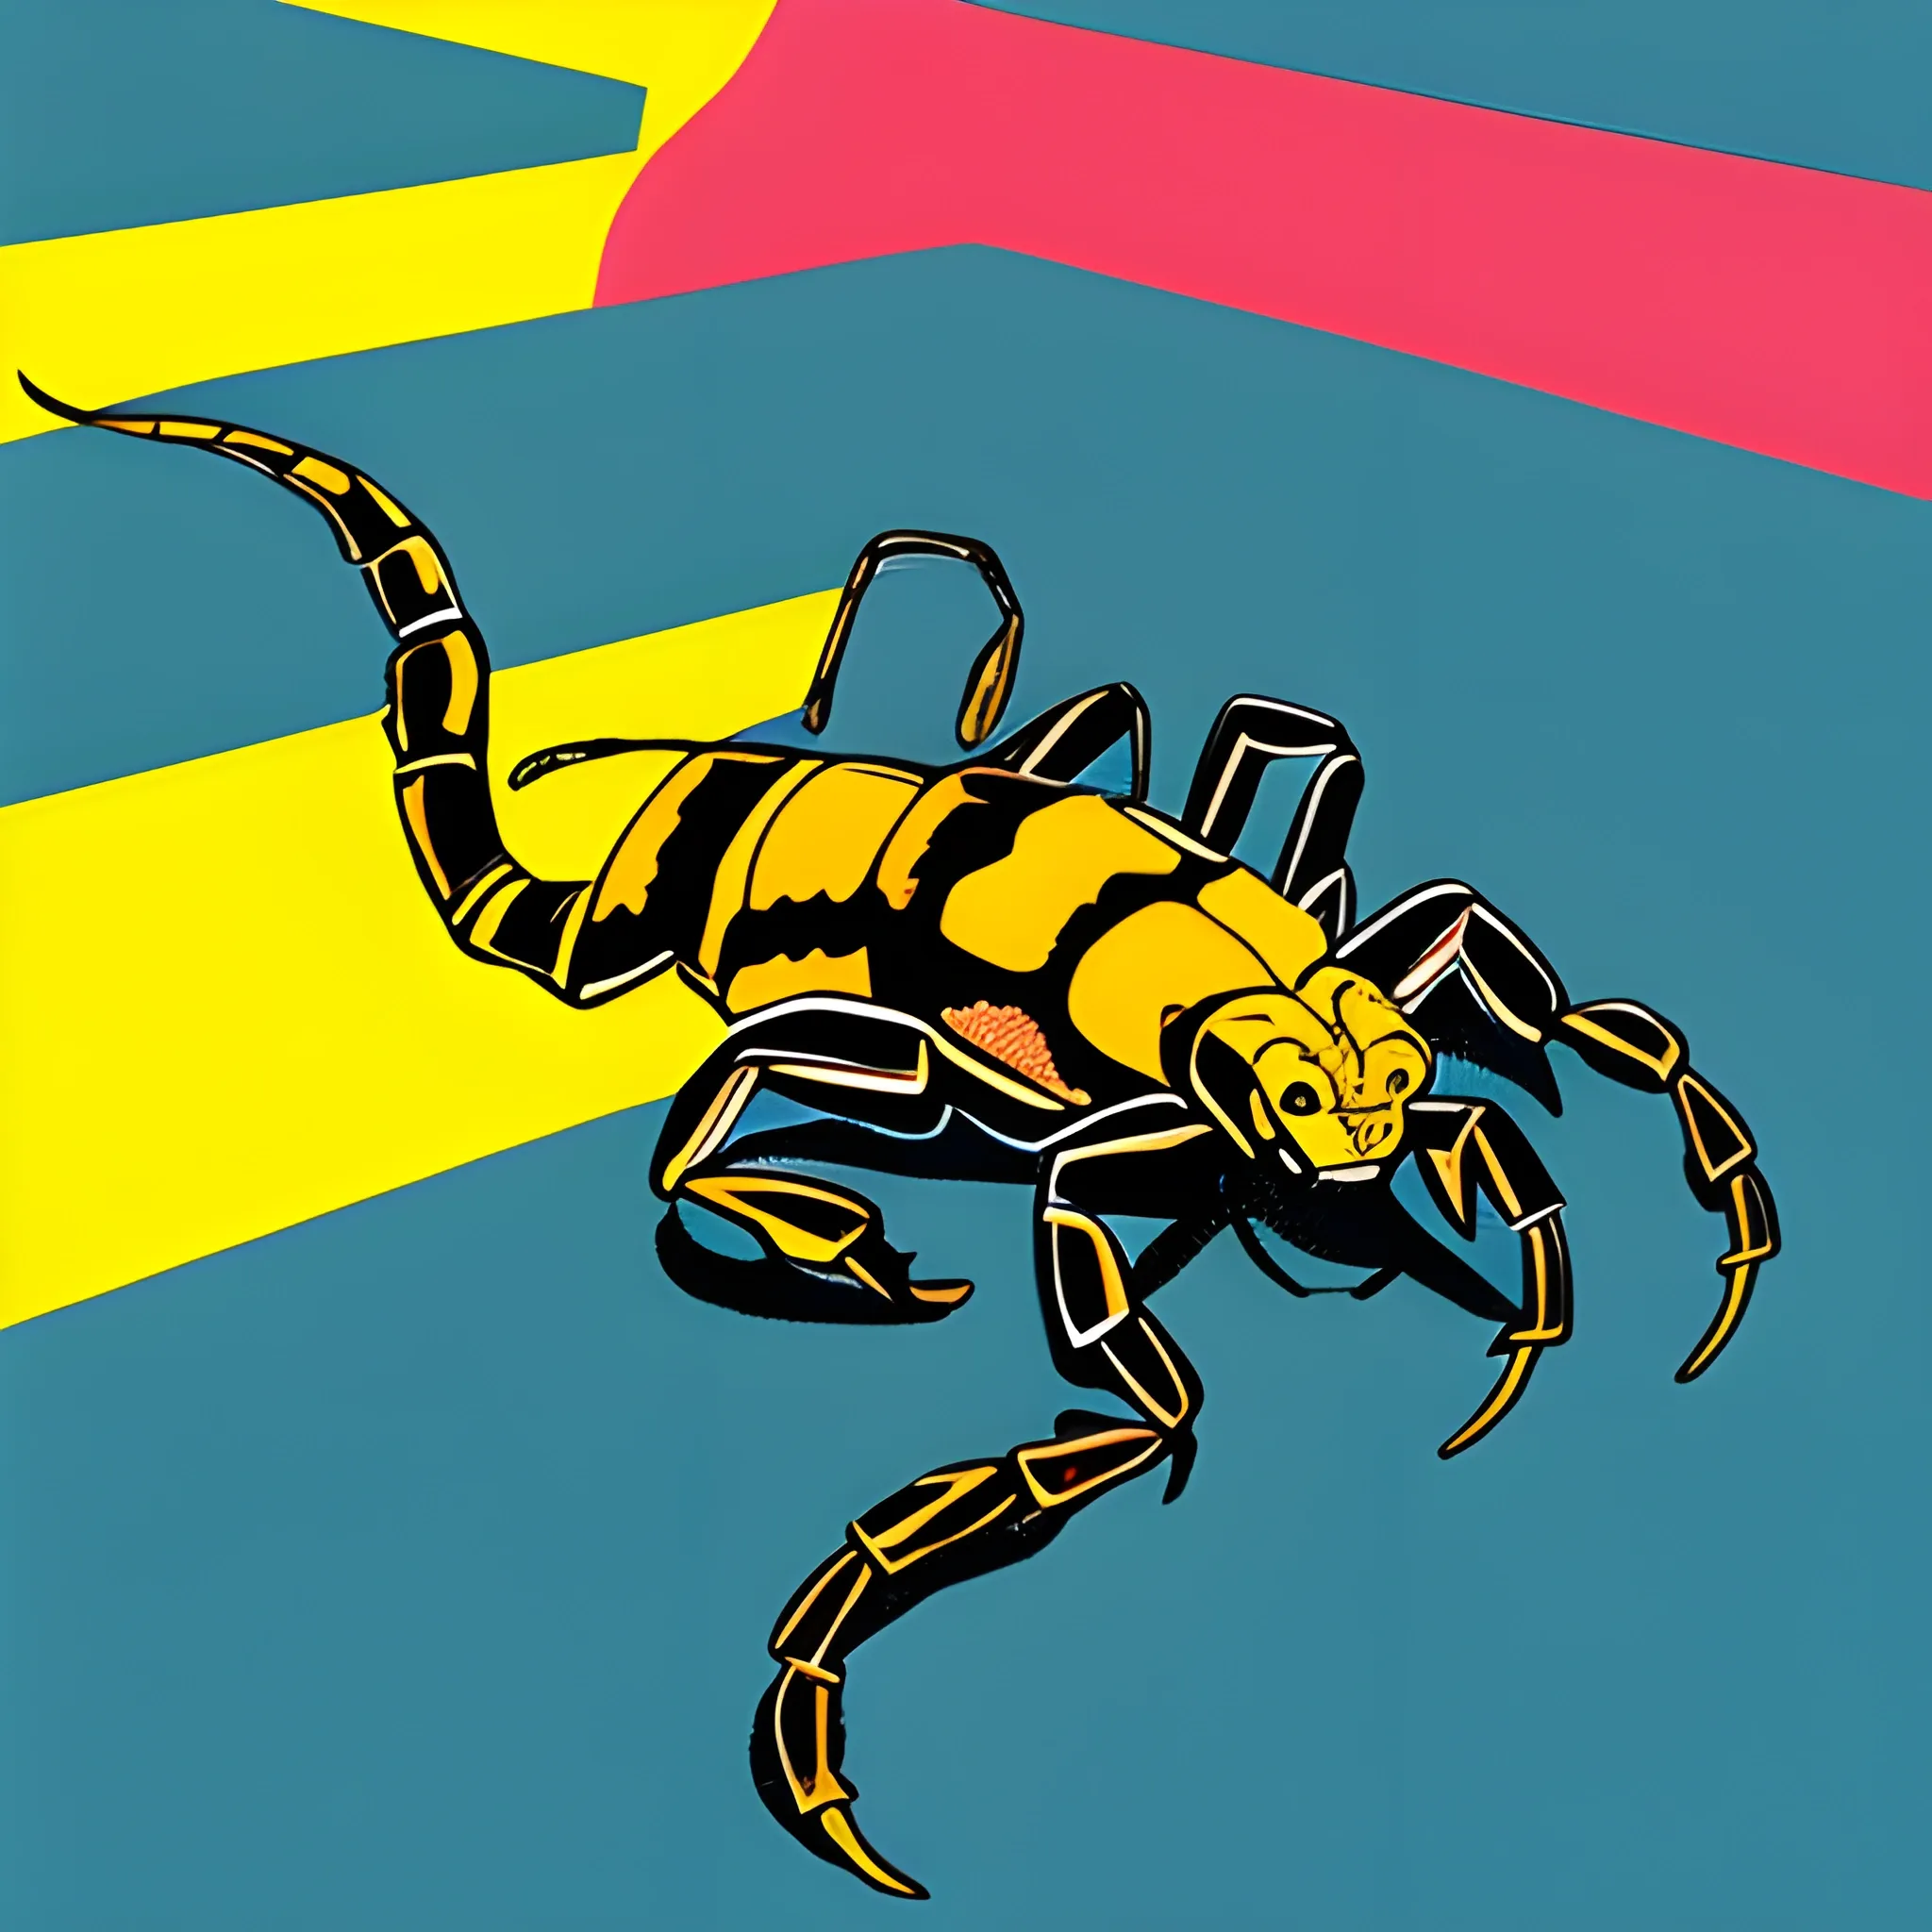 a scorpion using a "Tschabalala Self" style of art. specifically using the example of the work art named "floor dance"